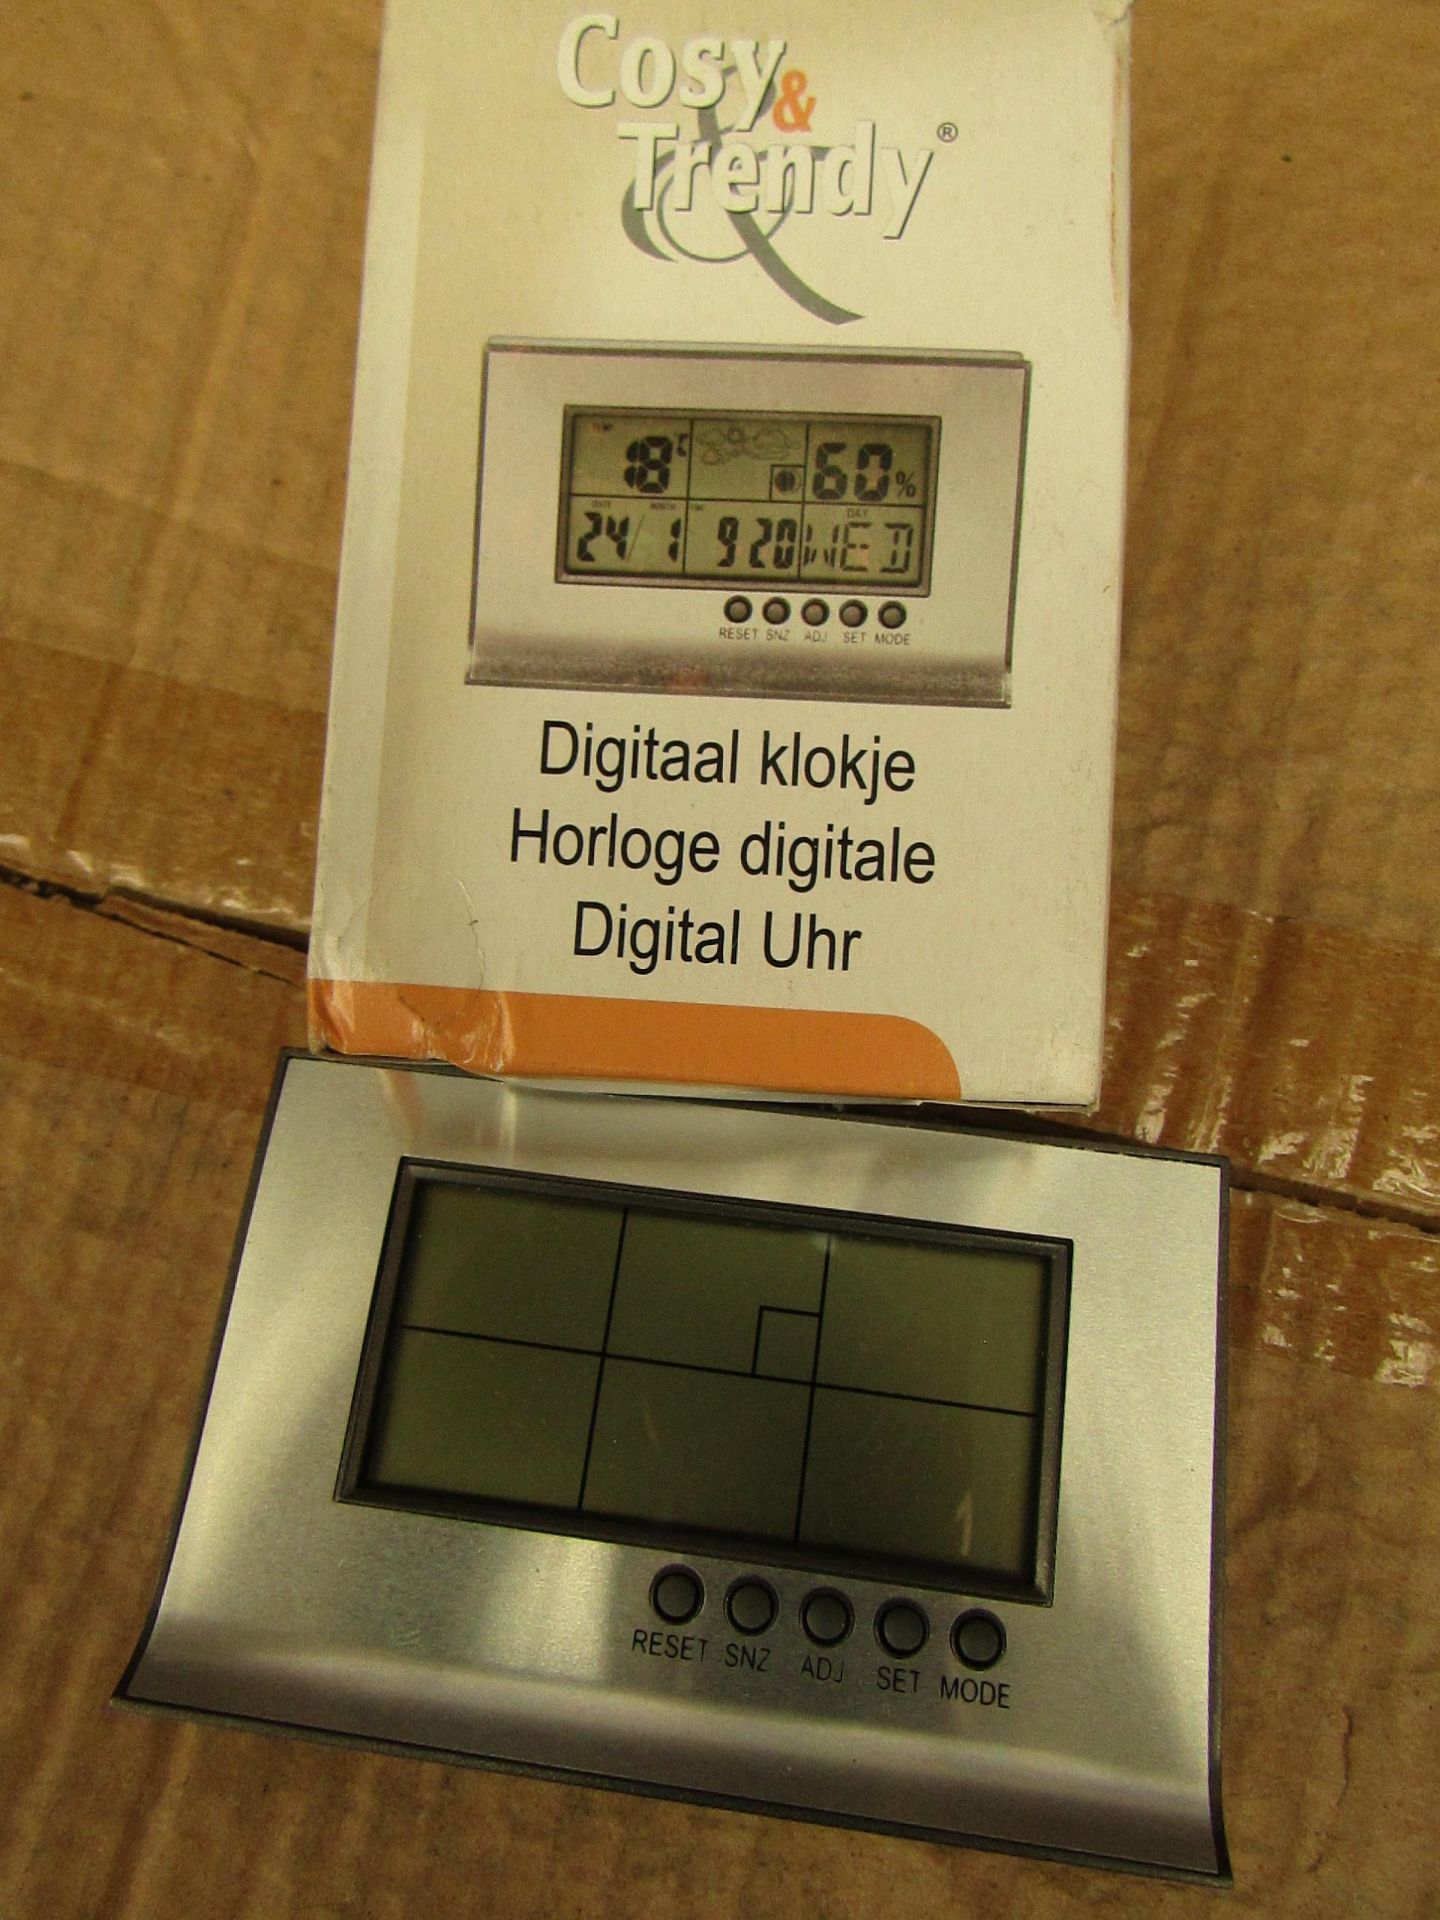 20 x Cosy & trendy Digital Clock/Weather station. Boxed